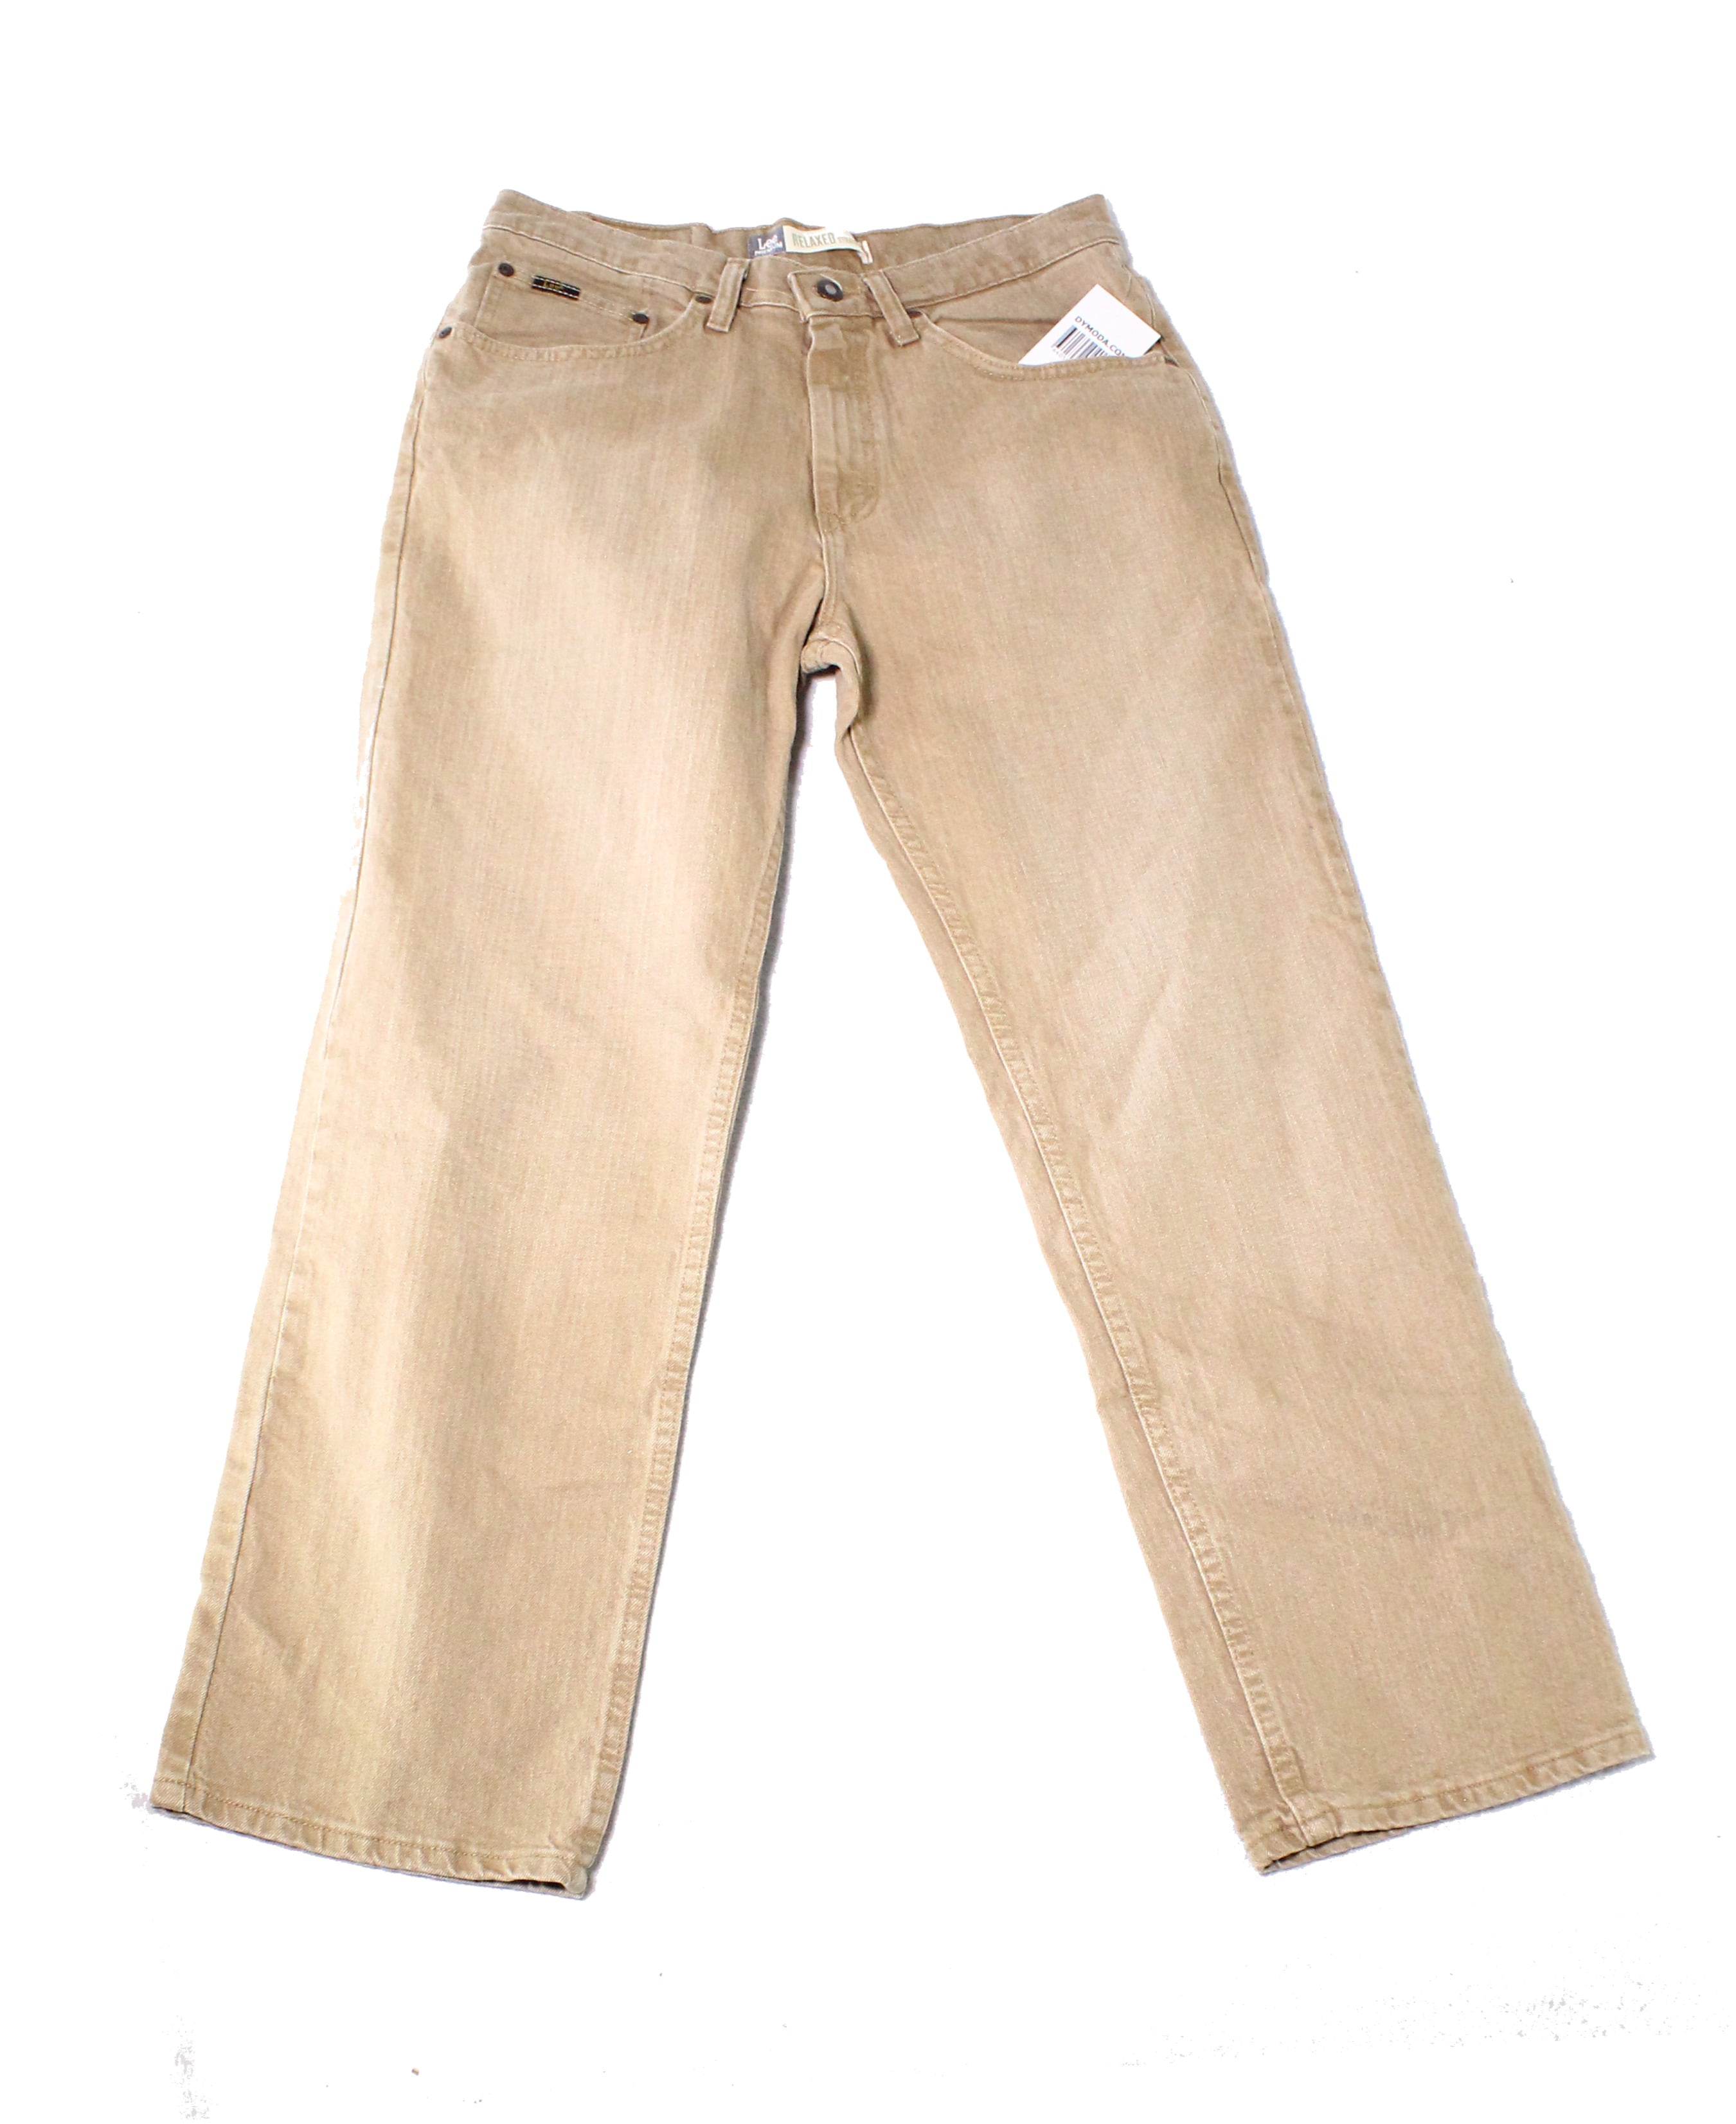 Lee - Lee NEW Beige Mens Size 32x29 Classic Straight Leg Stretch Jeans ...